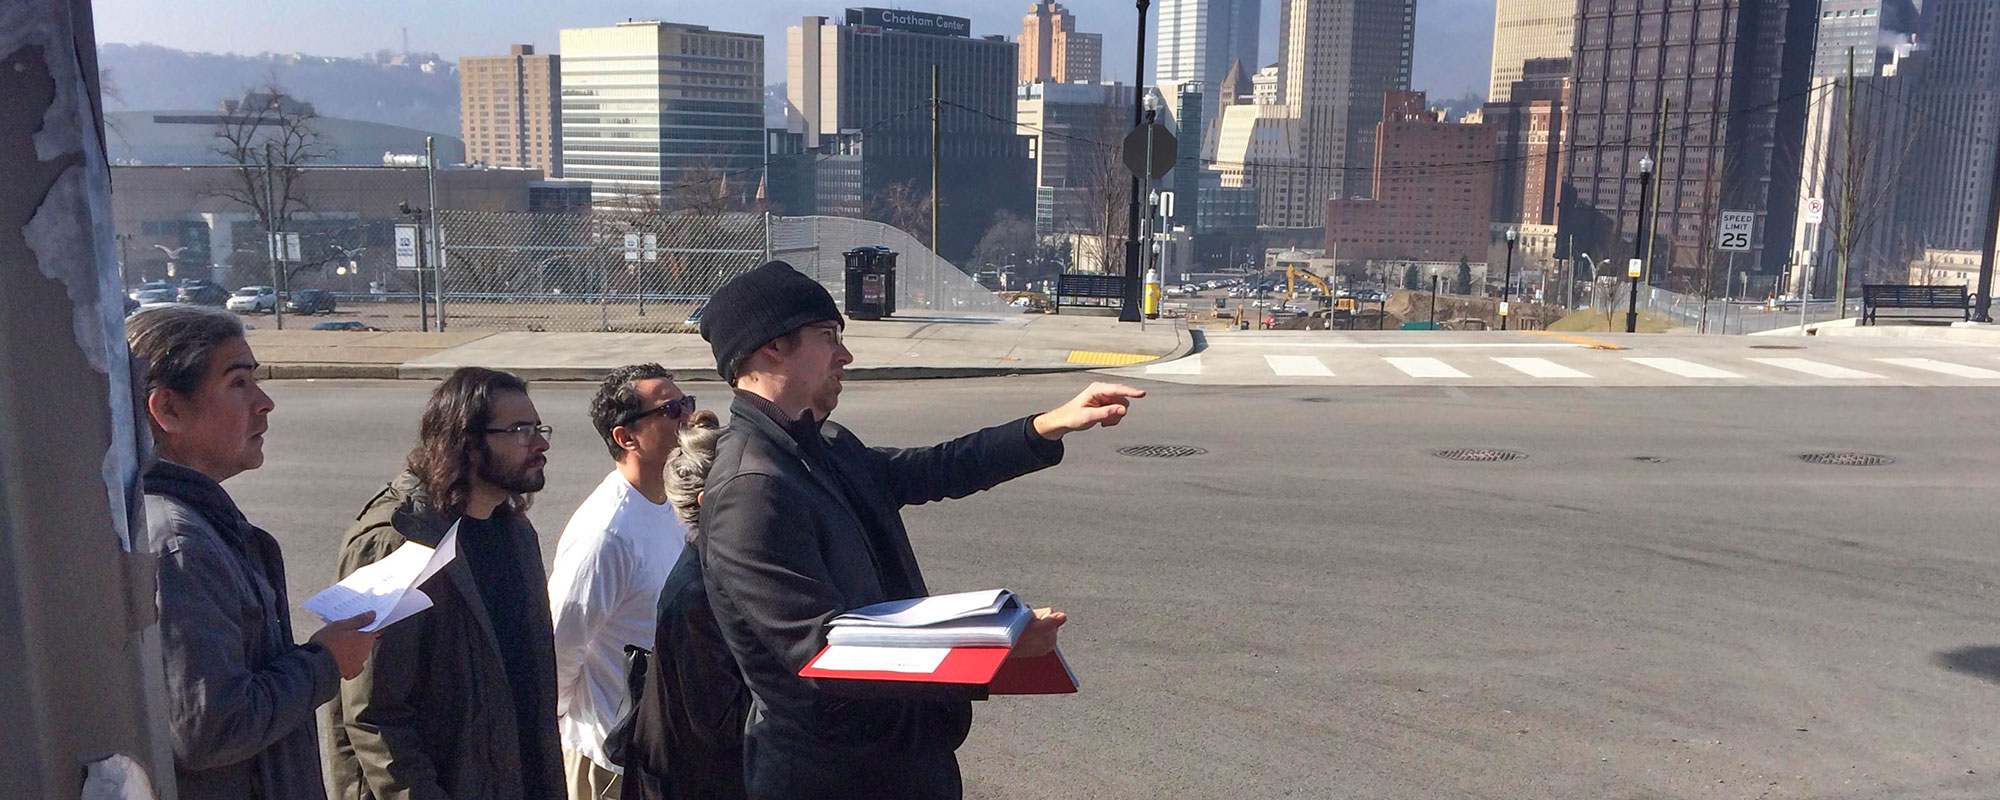 Group of people standing together with the city of Pittsburgh behind them. One man is pointing and holding a book.